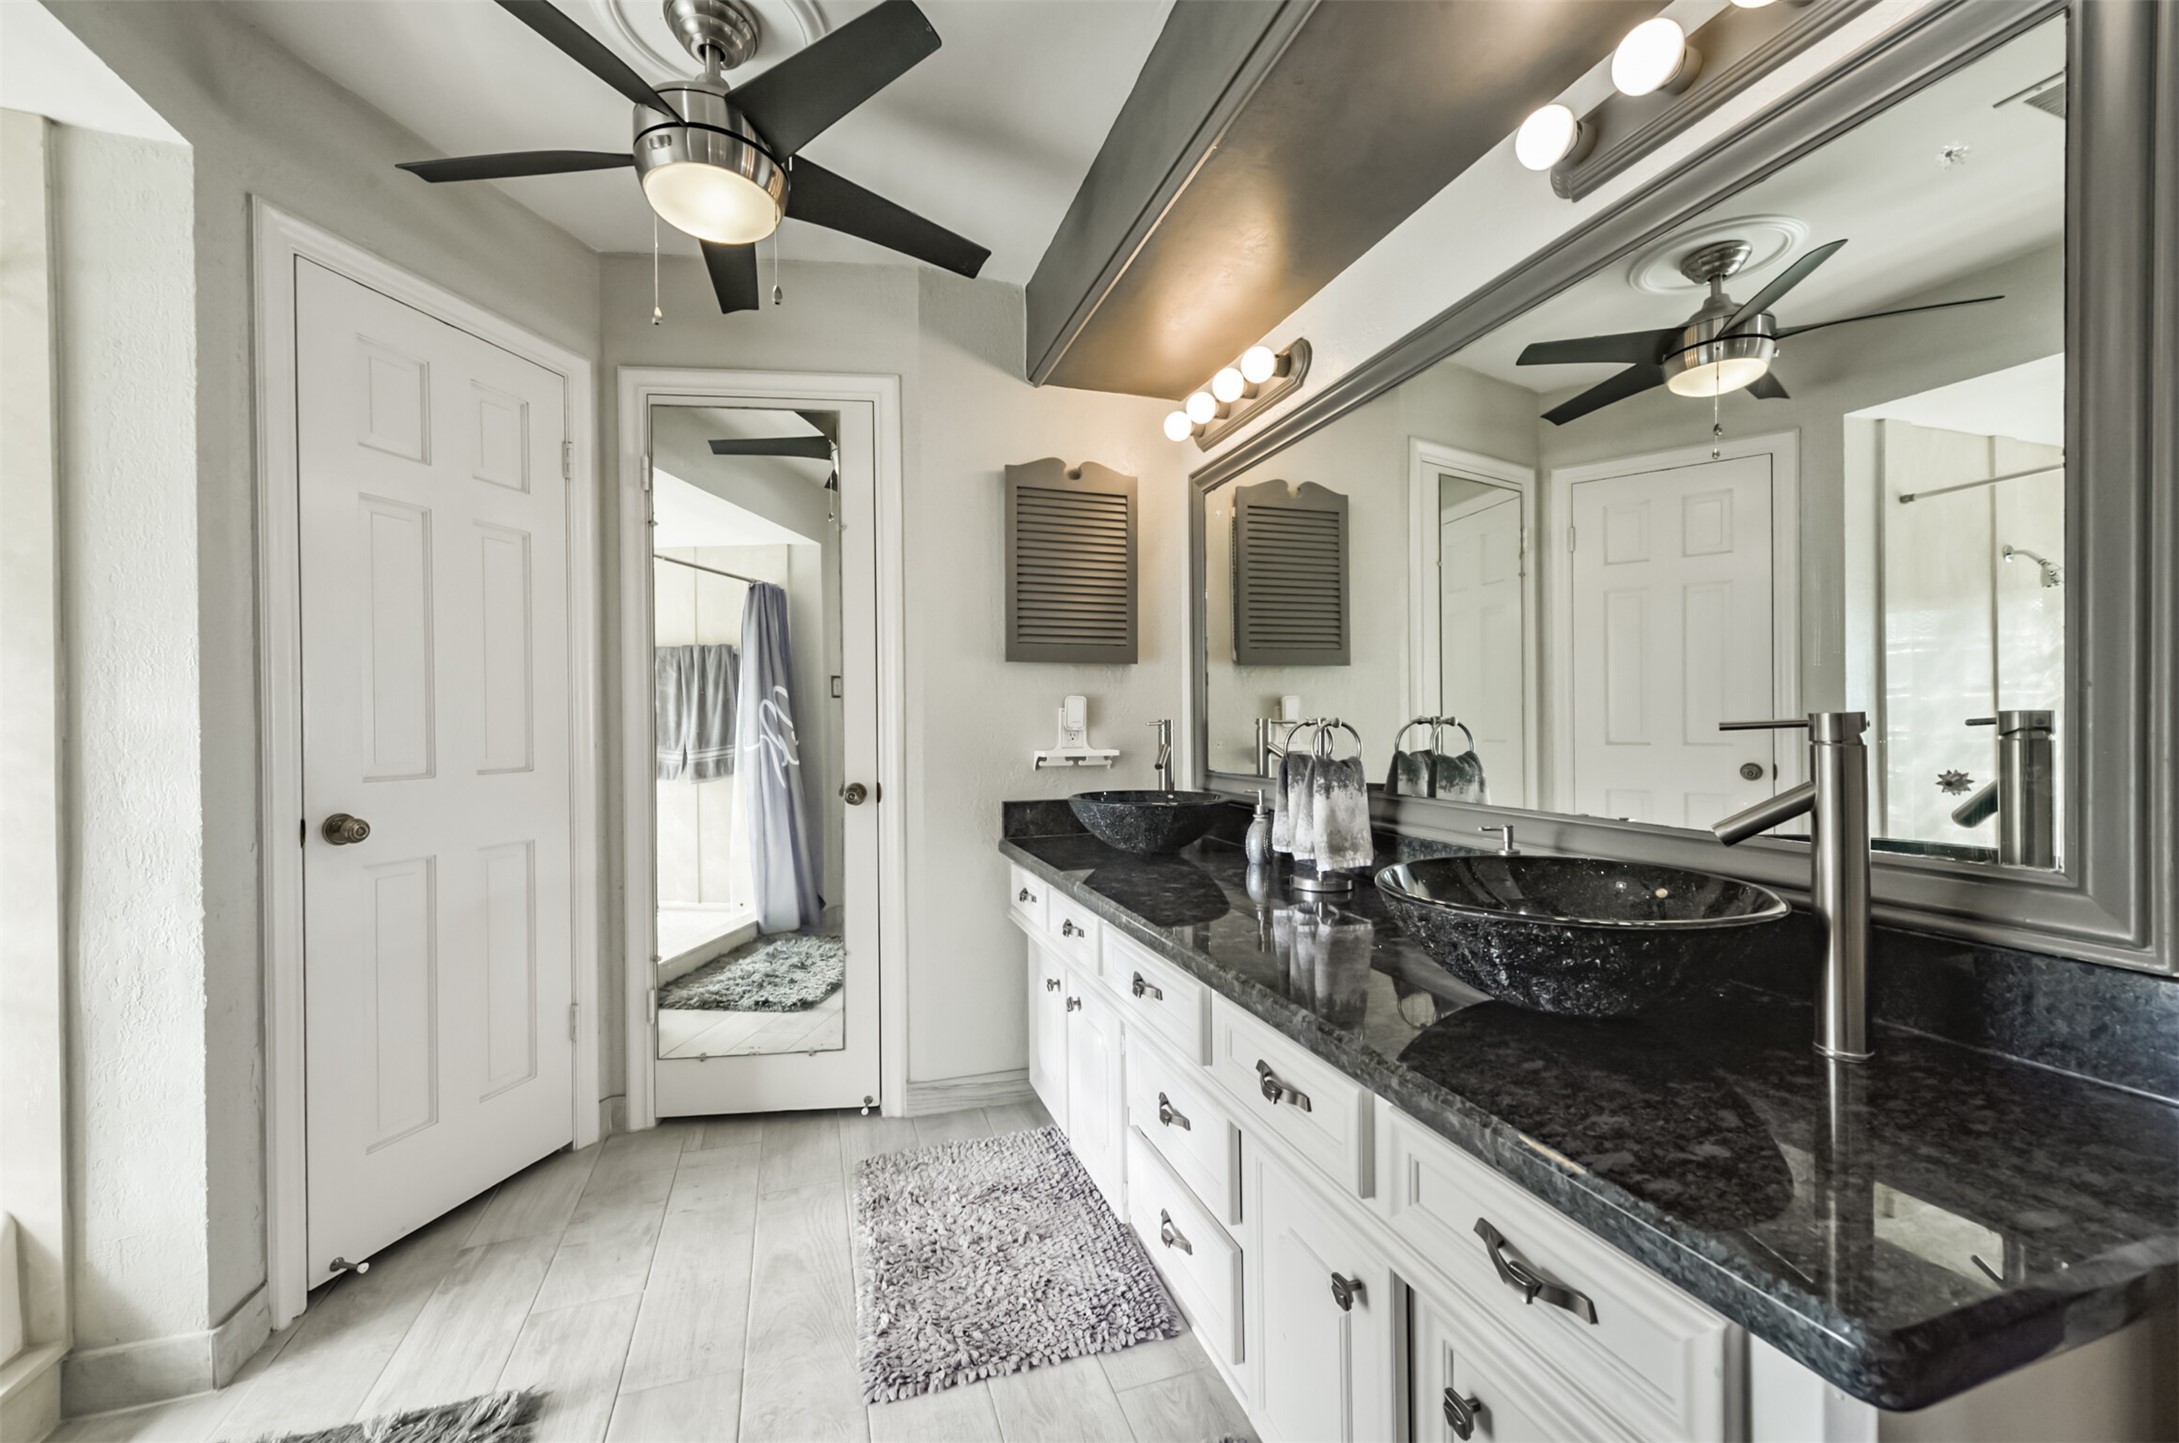 Double sinks, granite counter tops, a custom mirror and a ceiling fan in this elegant primary bathroom. The door with the mirror is the toilet.